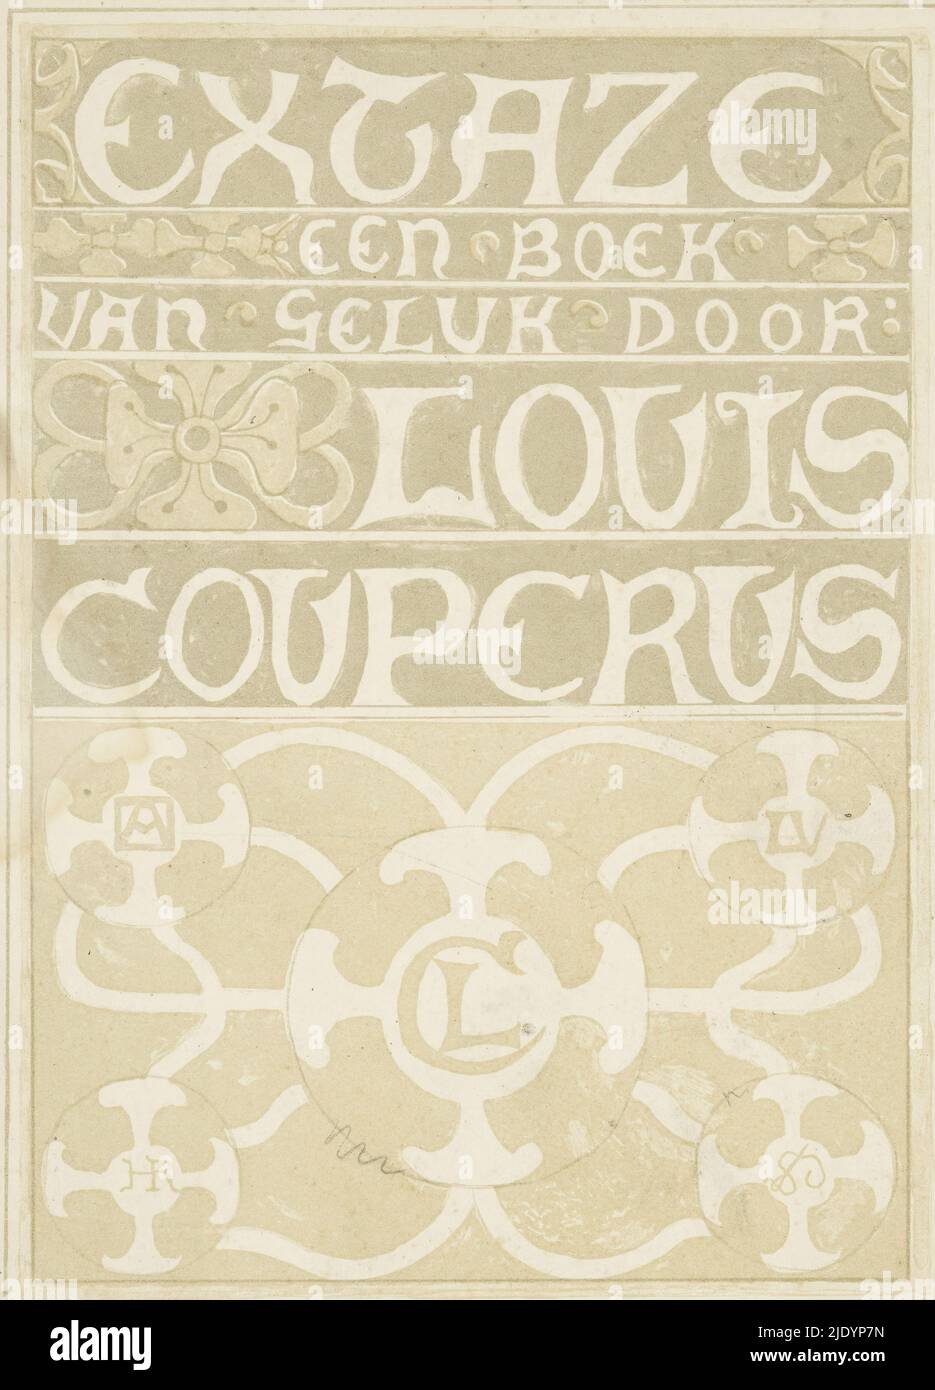 Band design for: Louis Couperus, Extaze: a book of happiness, 1894, Decorative lettering decorated with floral motifs. At bottom, four circles containing the monograms of Louis Couperus and Richard Roland Holst, among others., print maker: Richard Nicolaüs Roland Holst, (mentioned on object), in or before 1894, paper, height 210 mm × width 157 mm Stock Photo